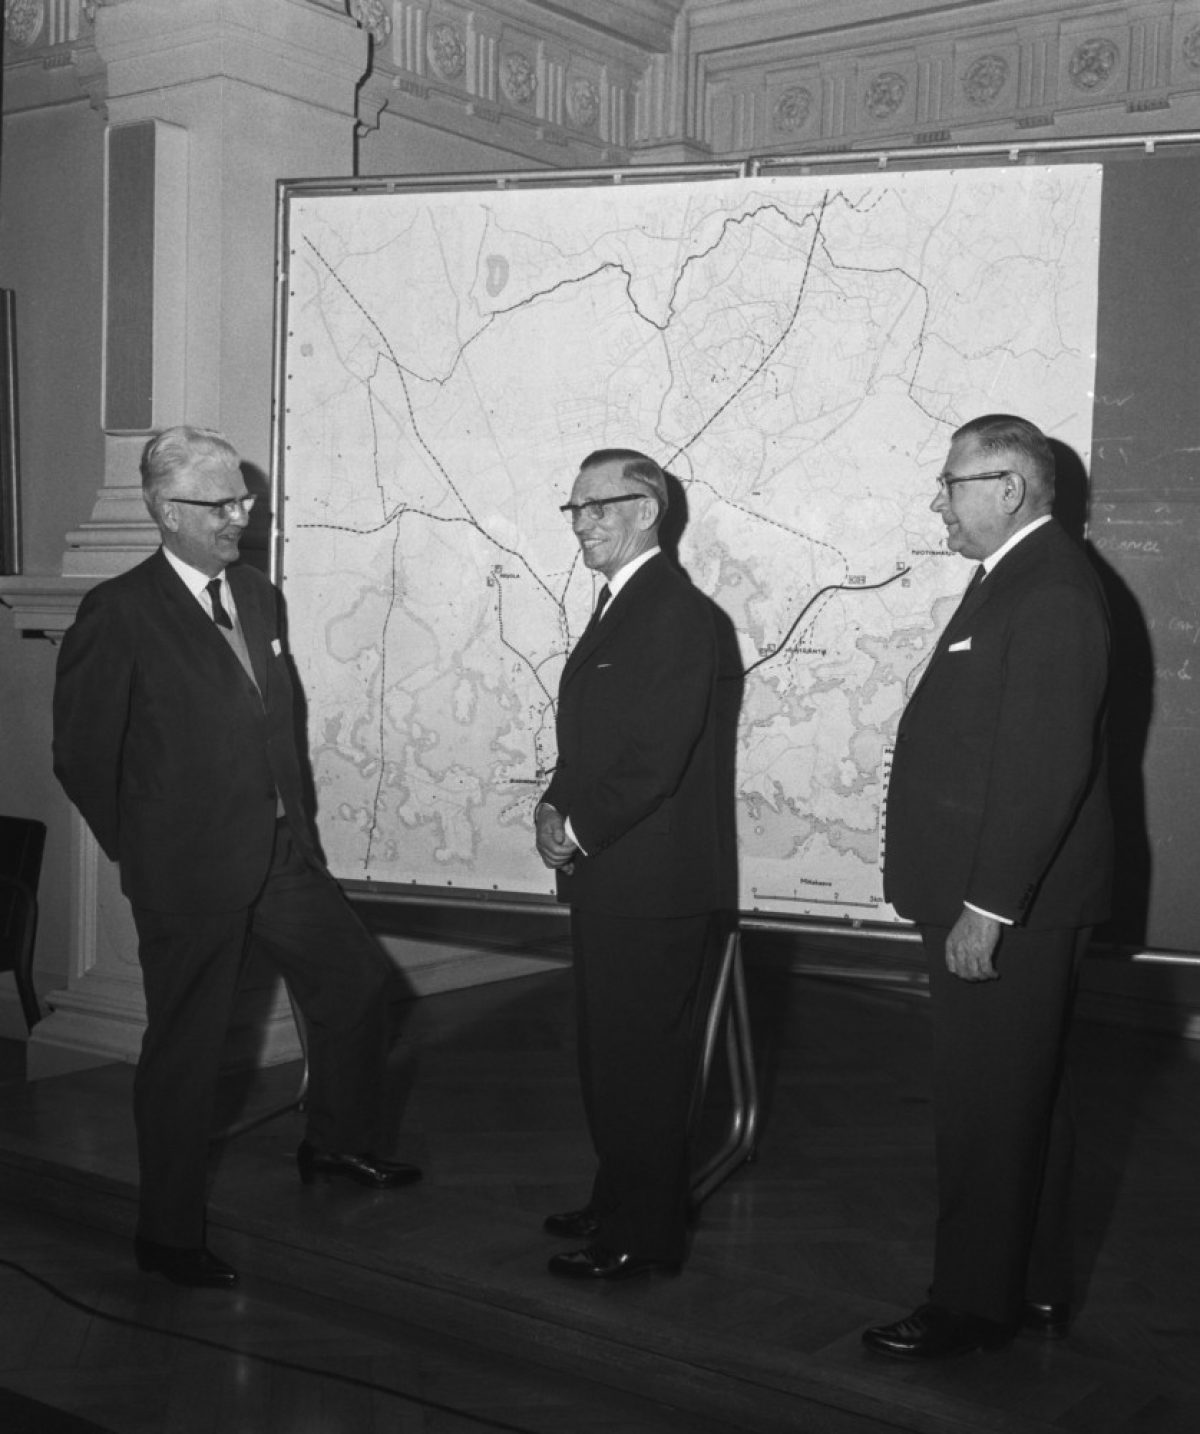 The Metro Committee submitted its report in 1965. On the left, Office Manager Reino Castrén, Lord Mayor Lauri Aho and Deputy Mayor J. A. Kivistö, 17 March 1965. Photo: Martti Halme / Uusi Suomi / JOKA / Finnish Heritage Agency